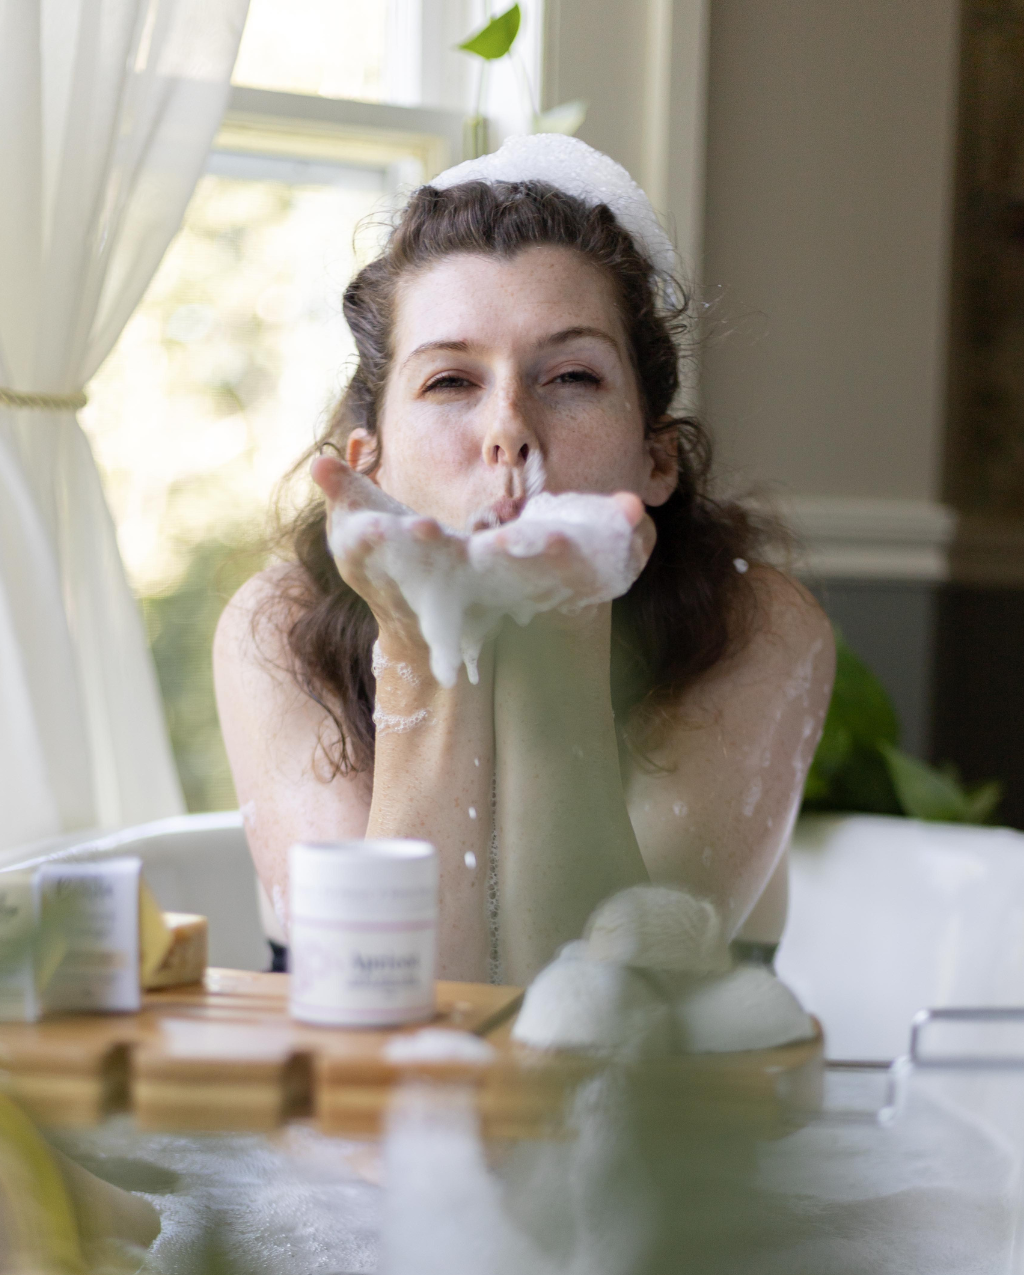 Bubbles &amp; Balms zero-waste bubble bath for dry &amp; sensitive skin making big bubbles in tub and safe enough for face to get close and blow bubble kisses.